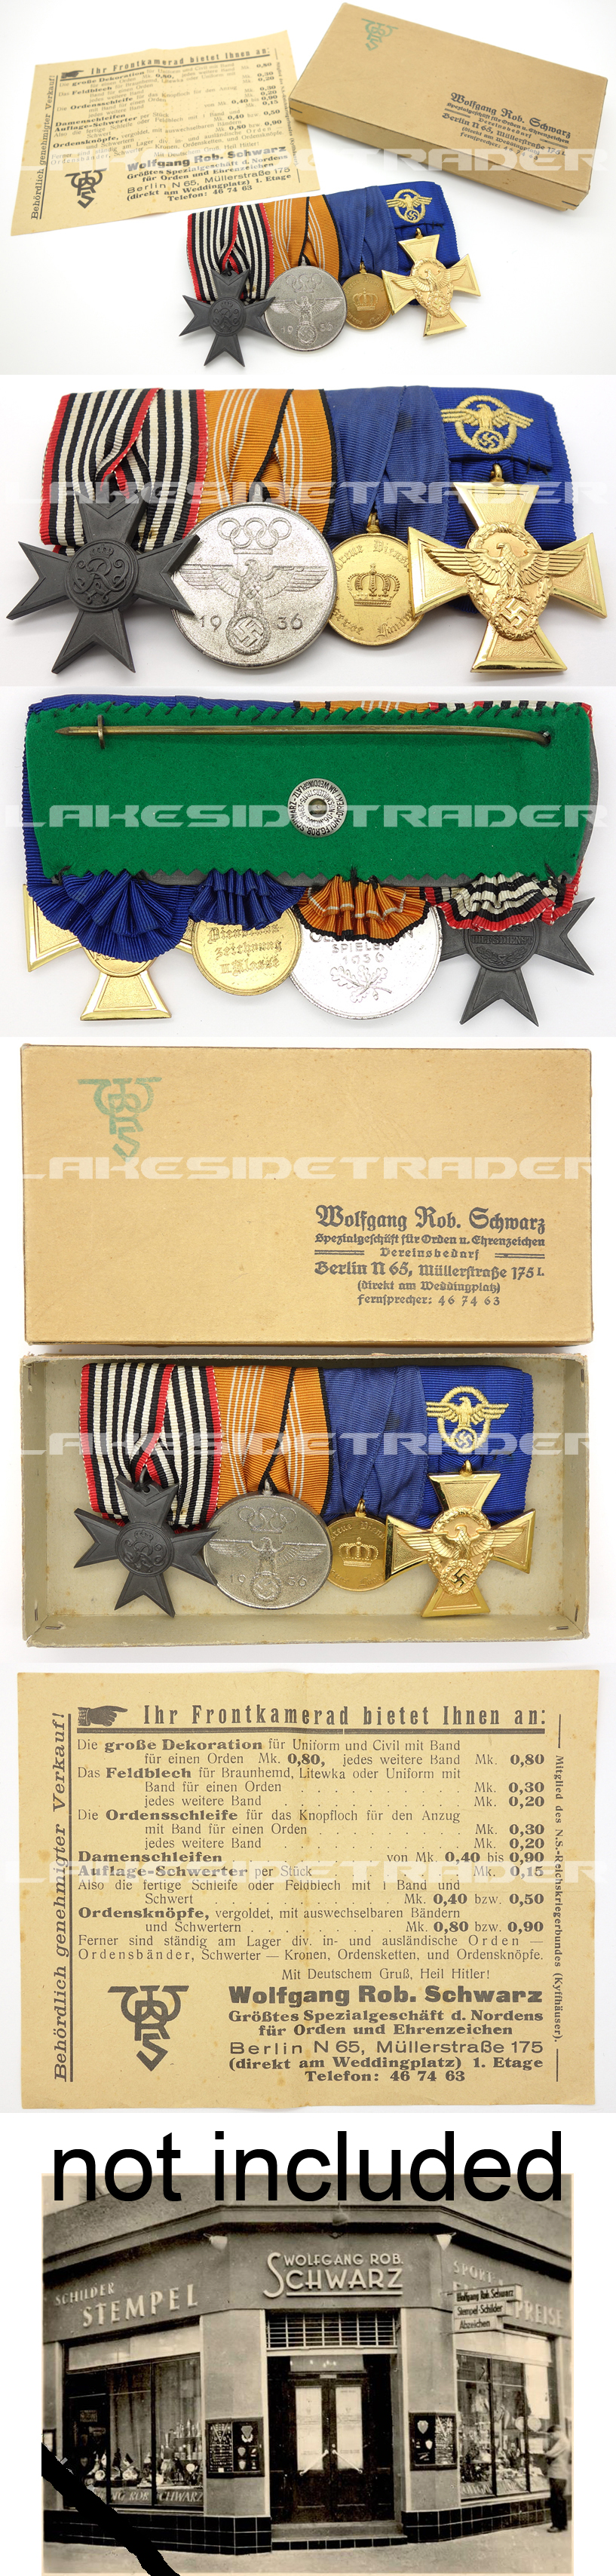 Four Piece Medal Bar in Sales Box